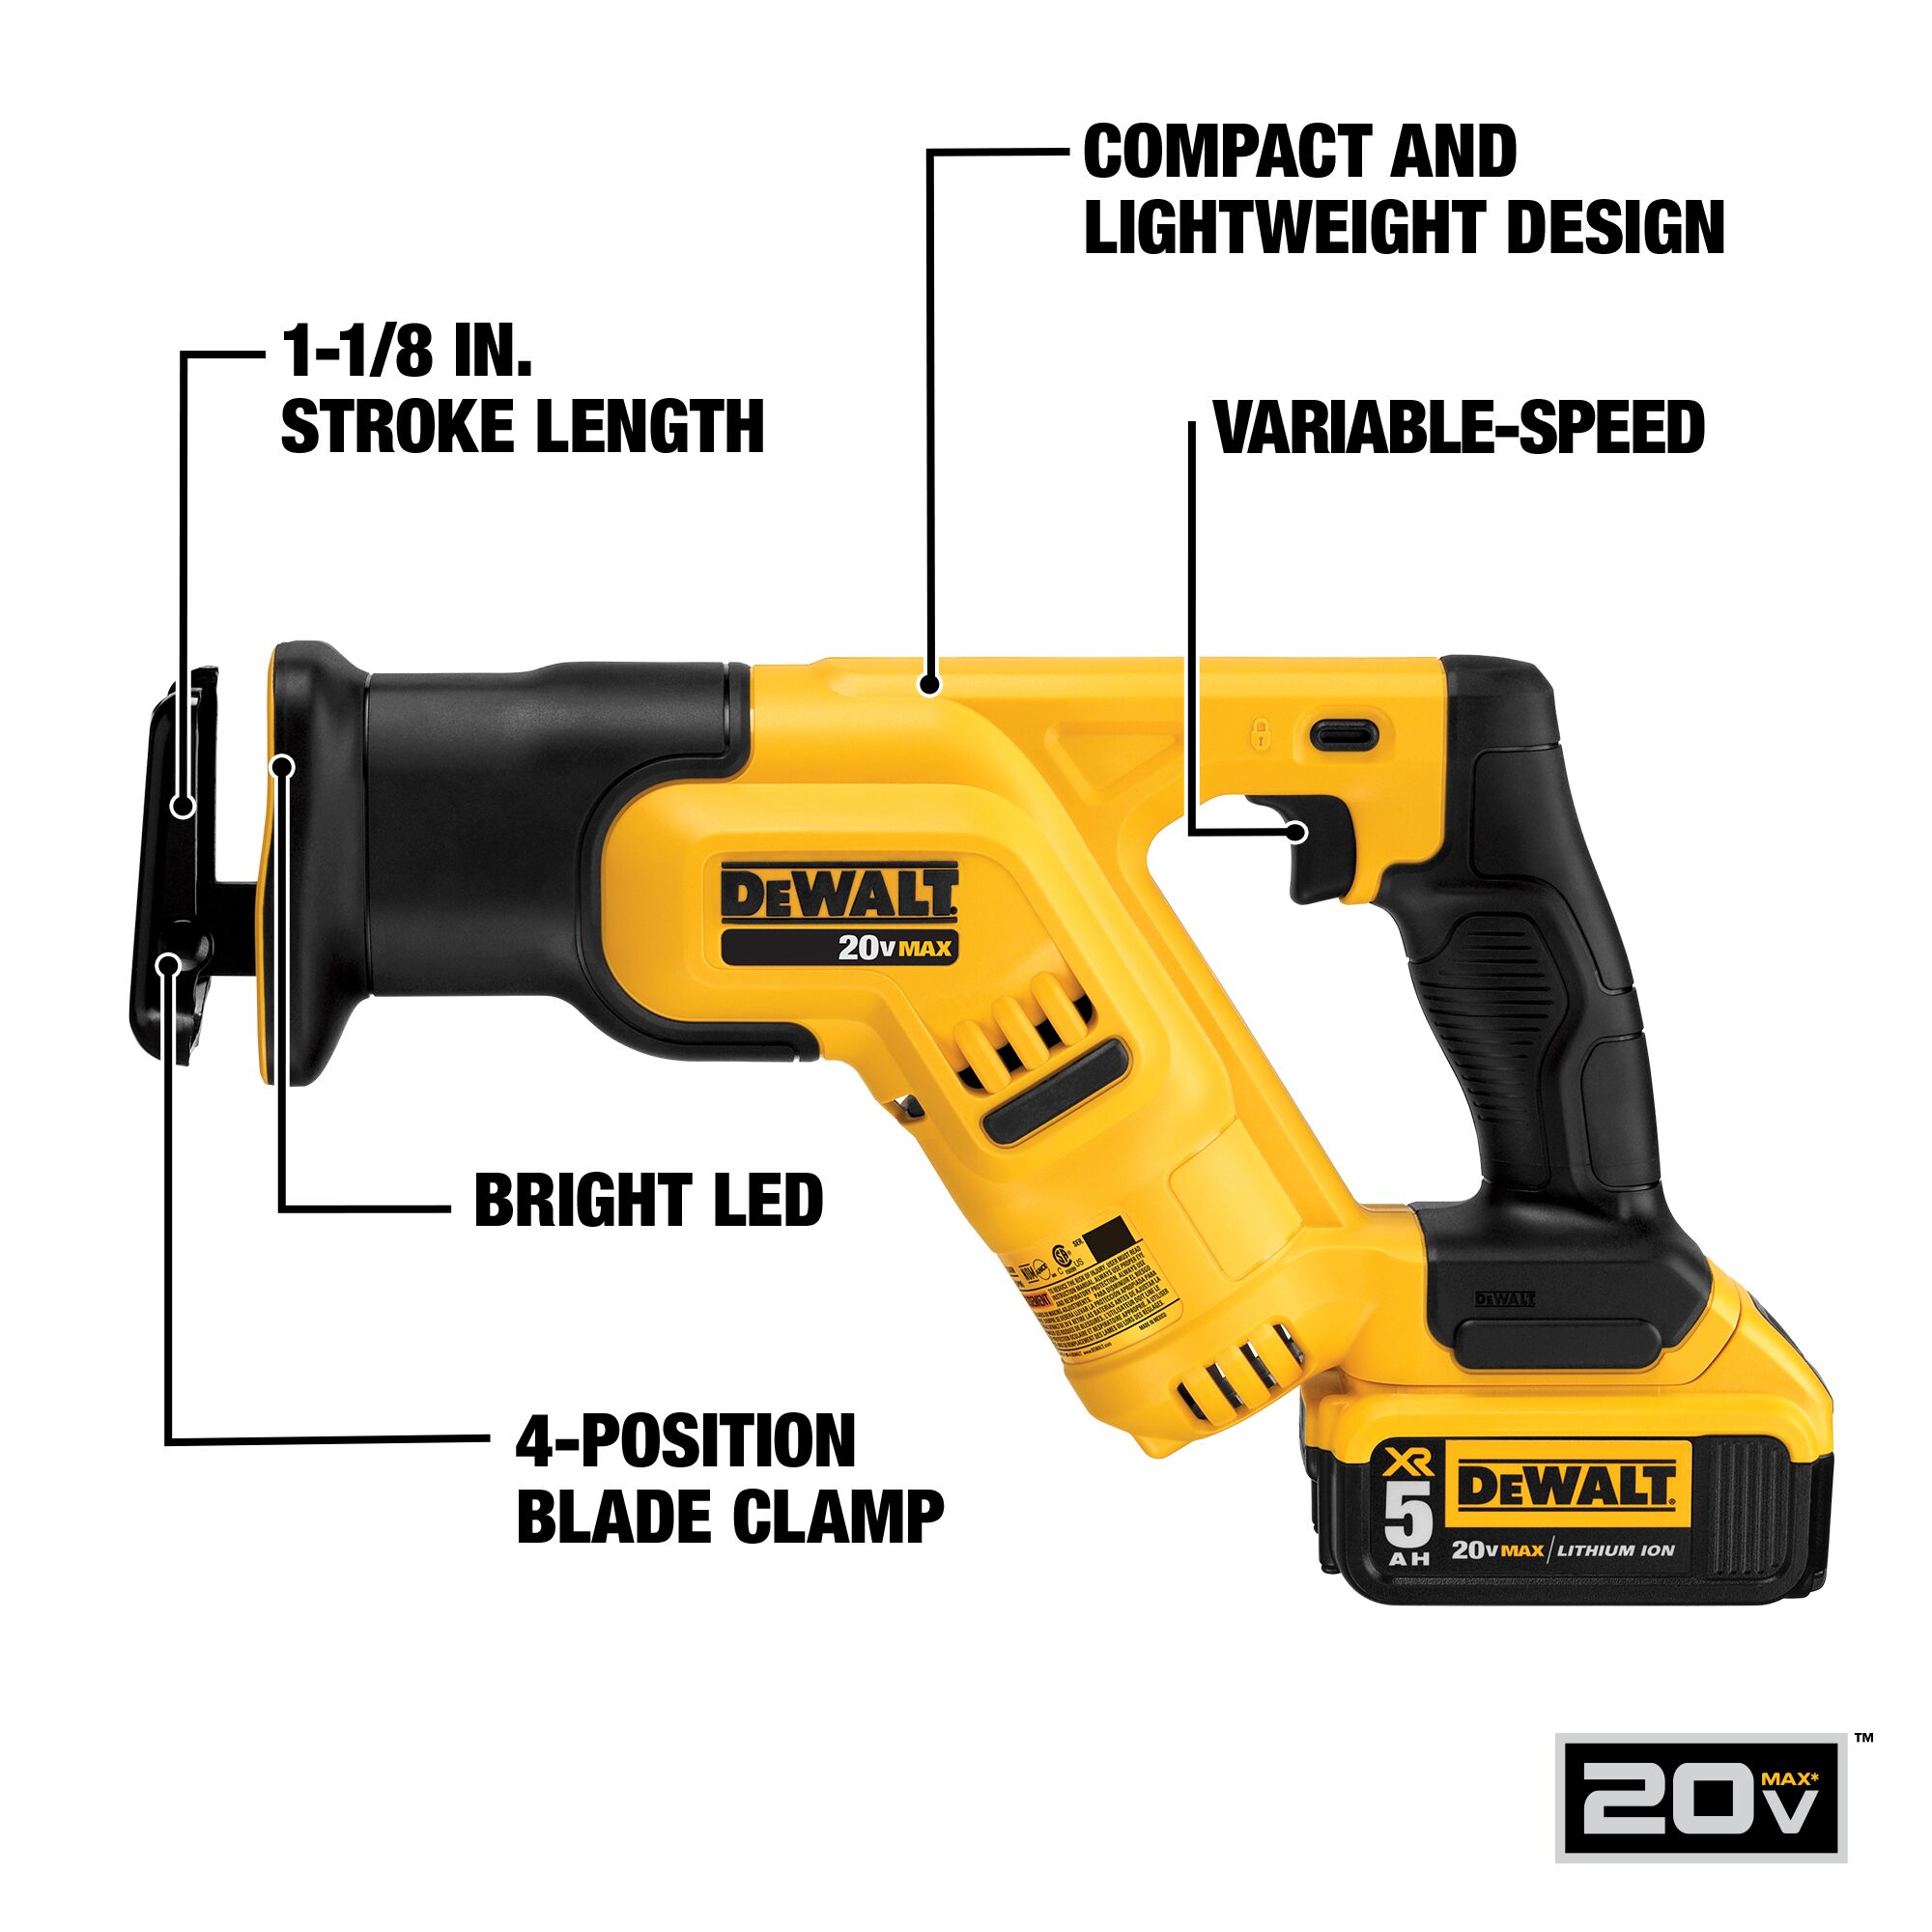 DEWALT DCS387P1 20-volt Max Variable Speed Cordless Reciprocating Saw (Charger Included and Battery Included) - 2